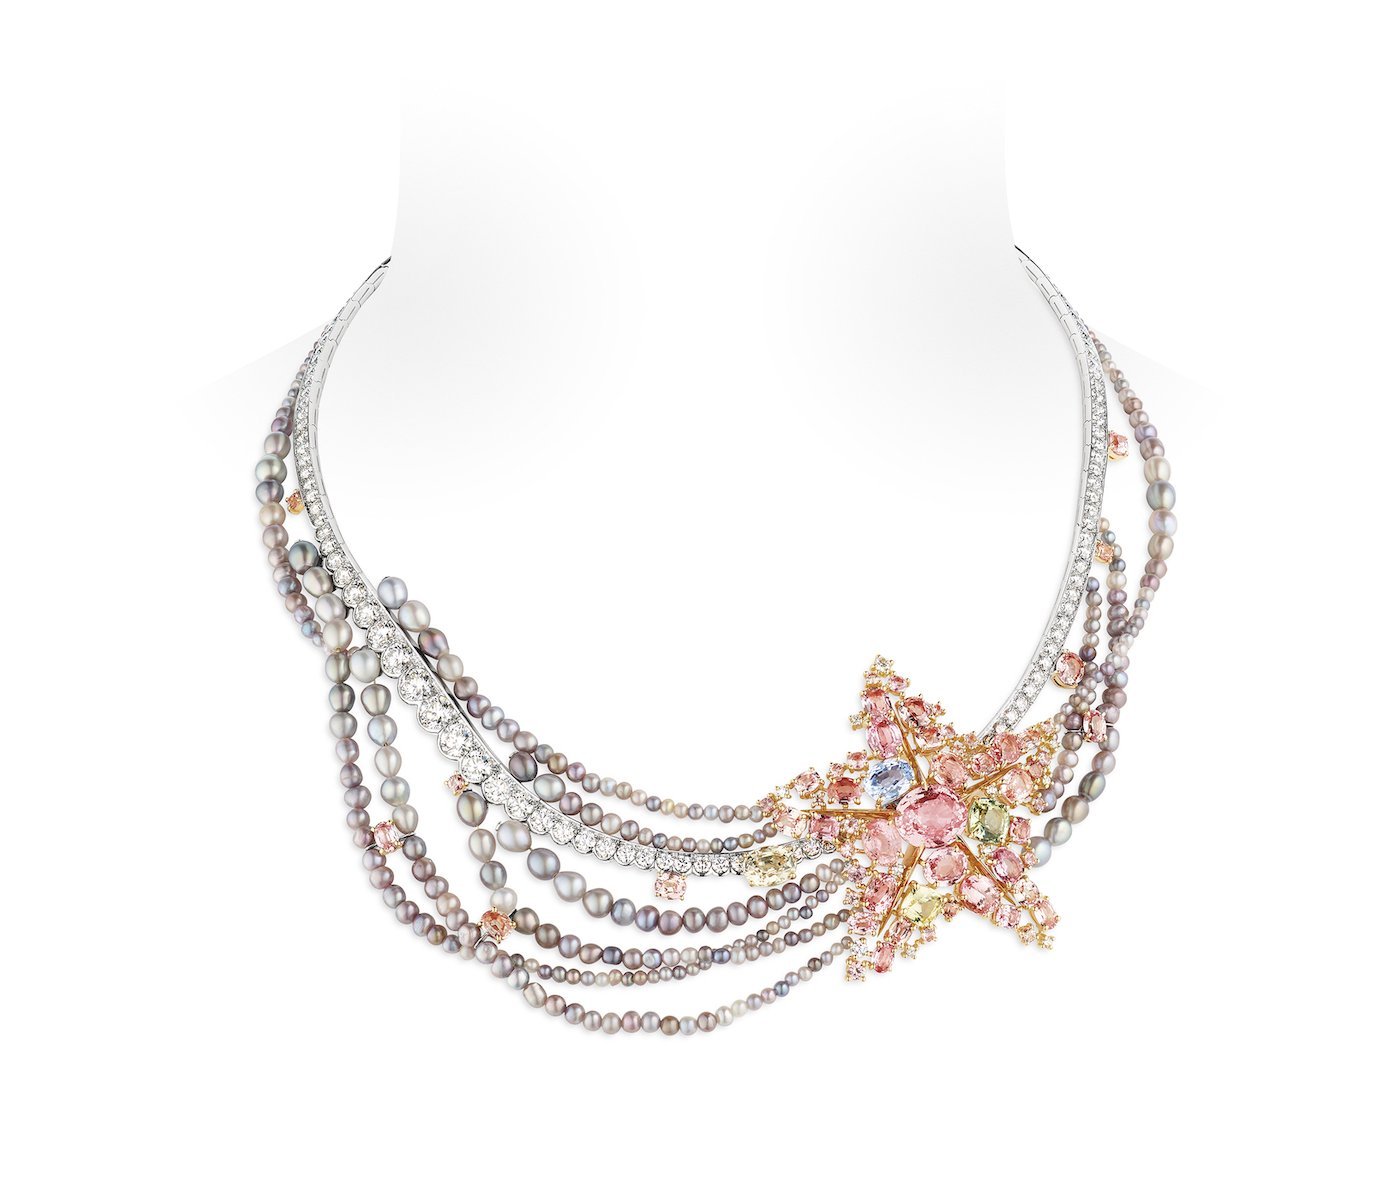 Necklace by Tiffany & Co. 